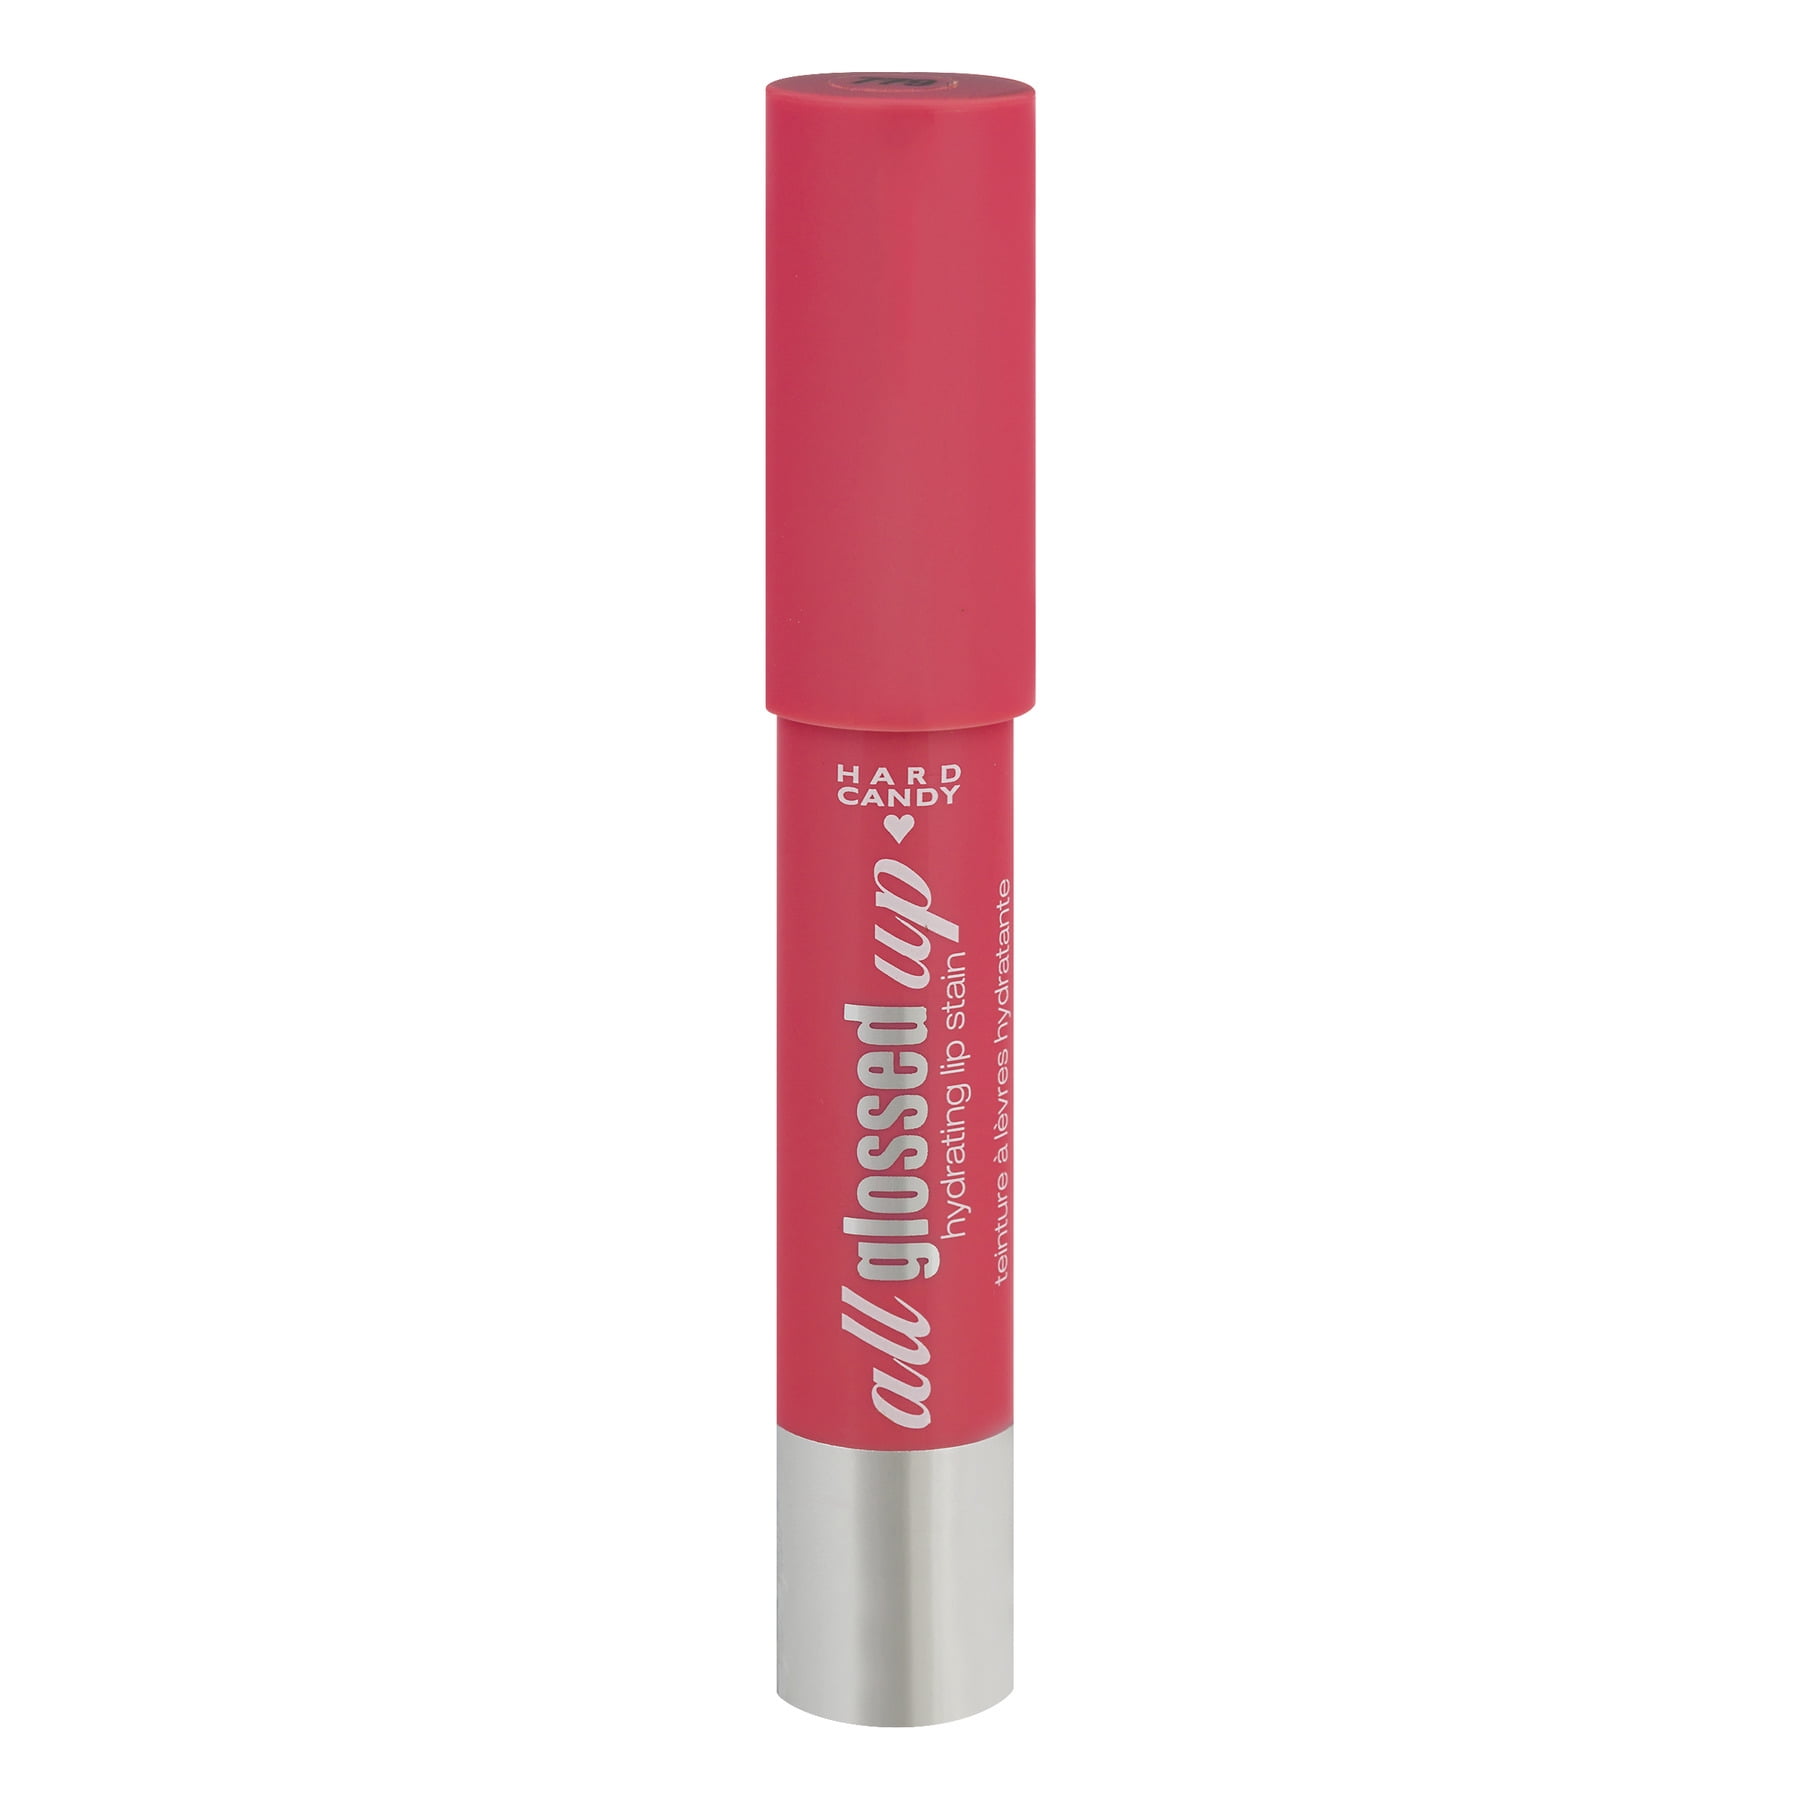 Hard Candy All Glossed Up Hydrating Glossy Lip Stain Crayon - Walmart.com